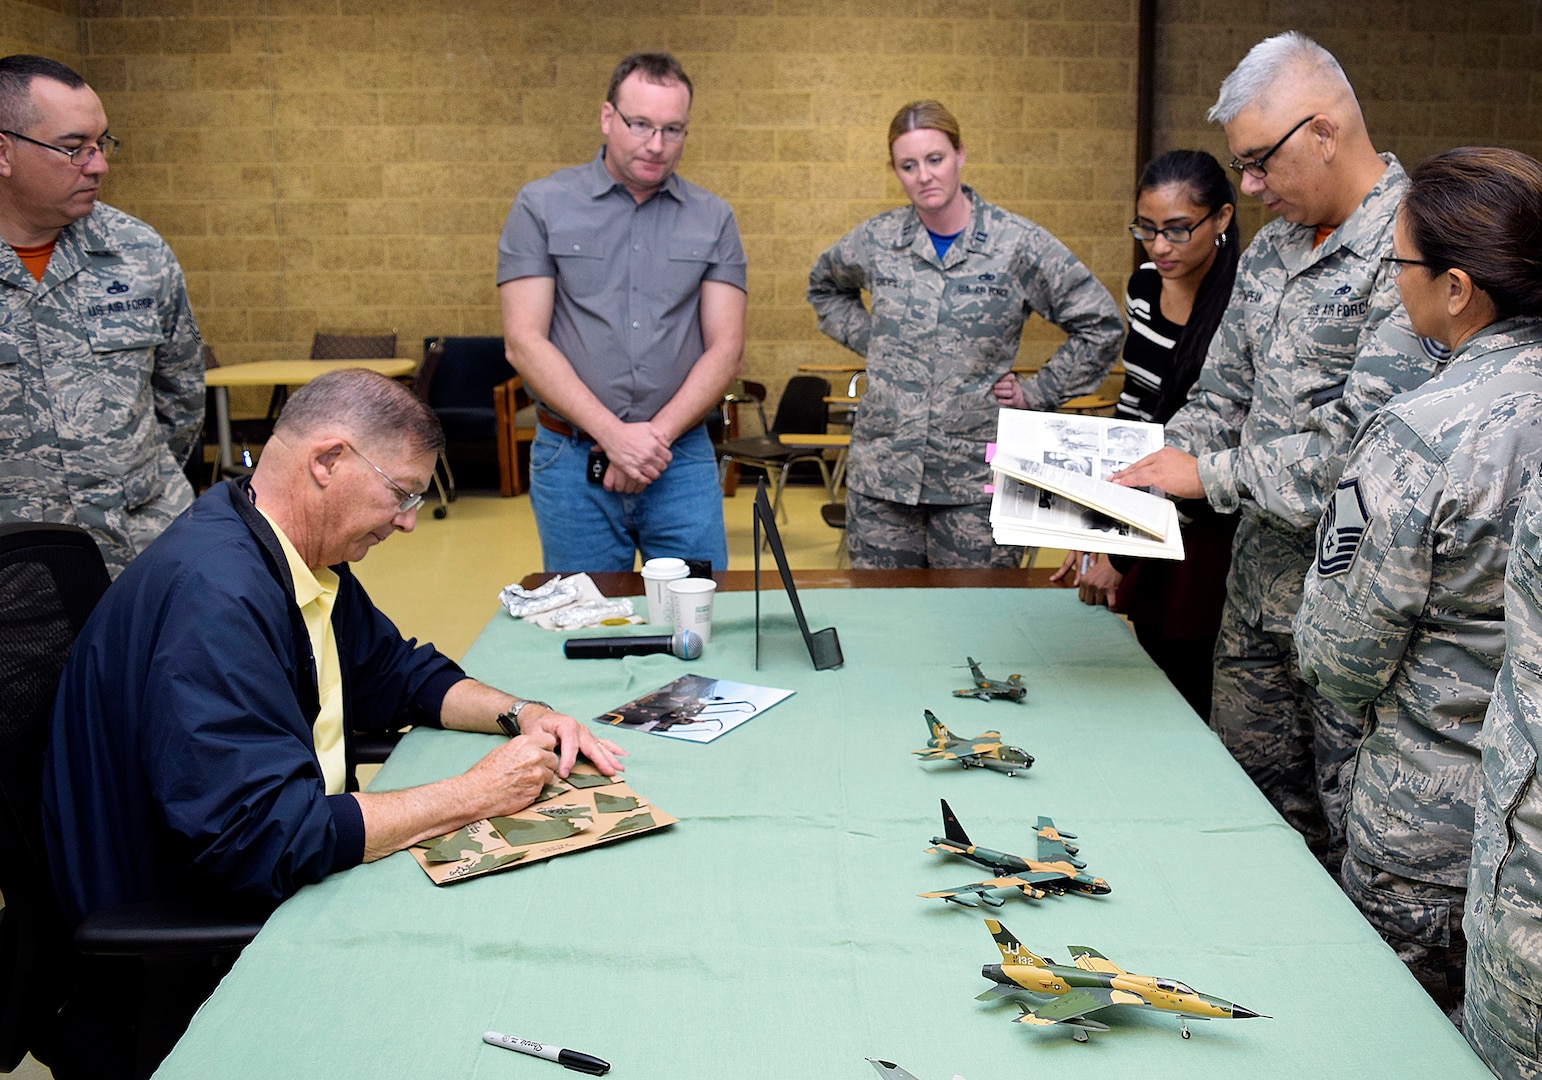 Retired Air Force ACE Col. Chuck Debellevue, the highest-scoring Ace of the Vietnam War, signs memorabilia after speaking to members of the 433rd Maintenance Group Feb. 10, 2017 at Joint Base San Antonio-Lackland, Texas. Debellevue served as the guest speaker during the 433rd Airlift Wing awards banquet.  (U.S.  Air Force photo by Maj. Timothy Wade)